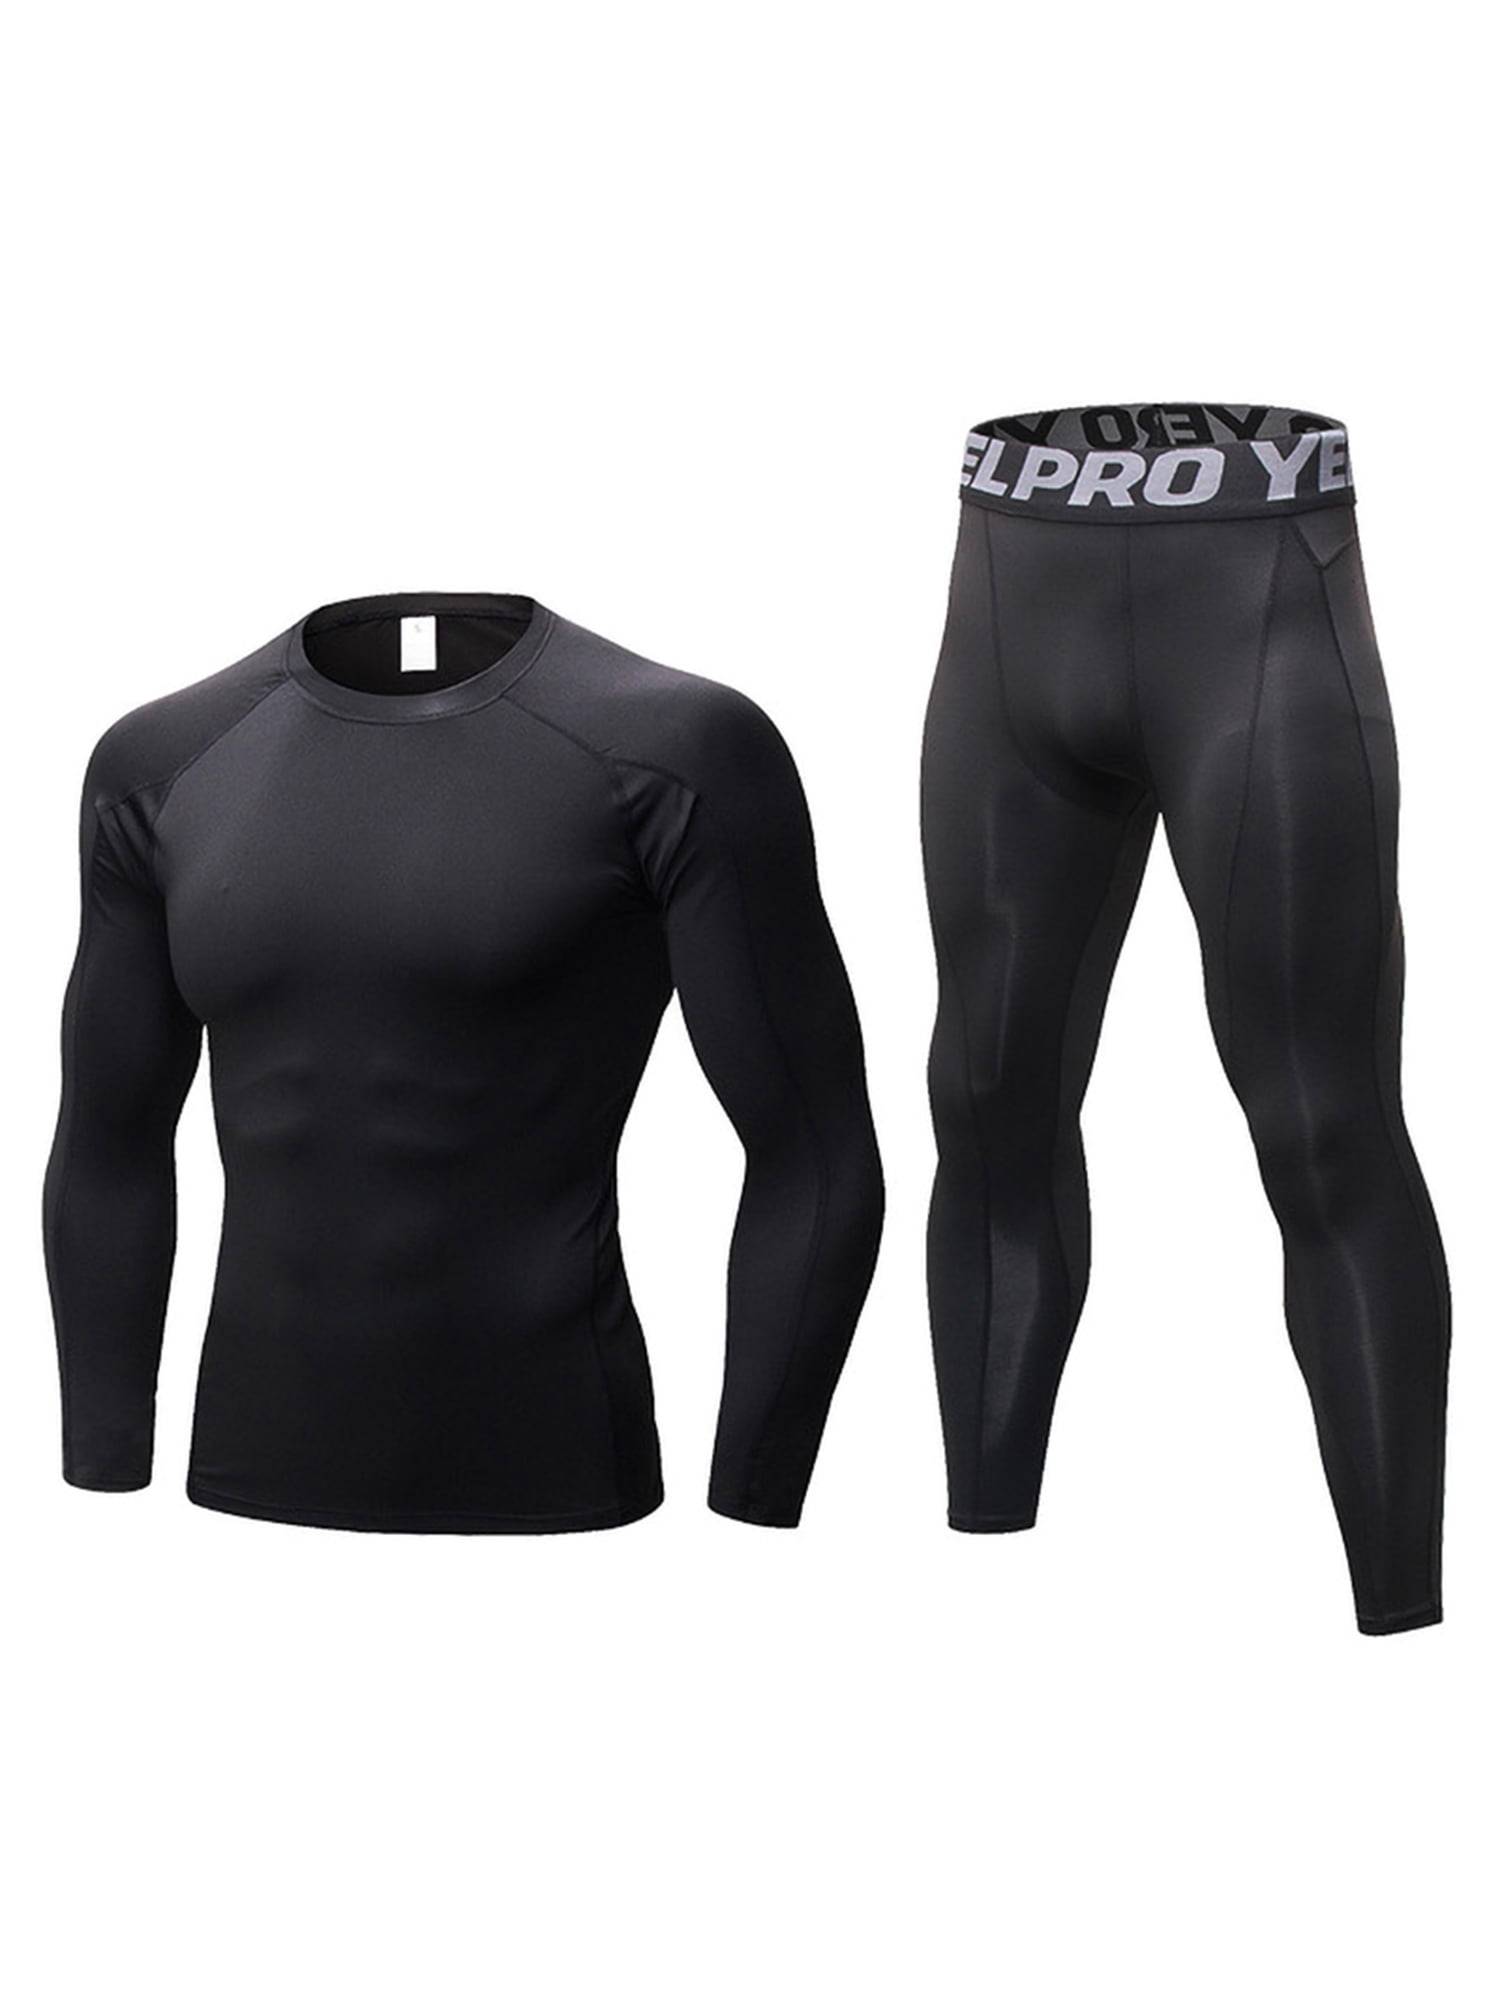 Shirt Base Layer Sports Pant Under Full Suit Outfits Mens Compression Tights 